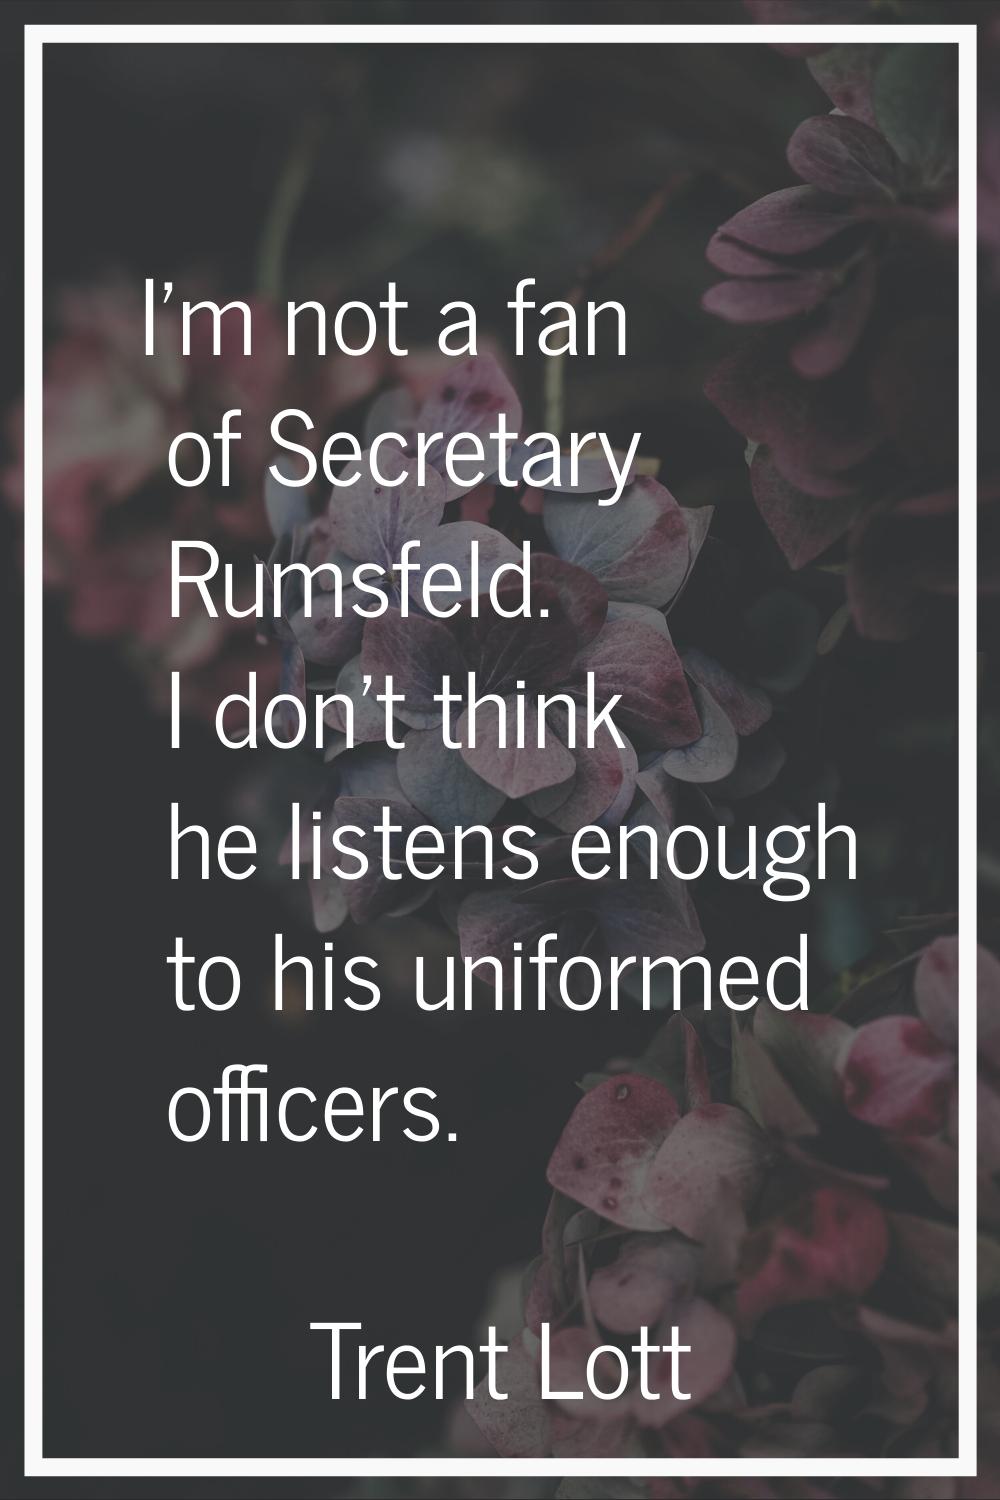 I'm not a fan of Secretary Rumsfeld. I don't think he listens enough to his uniformed officers.